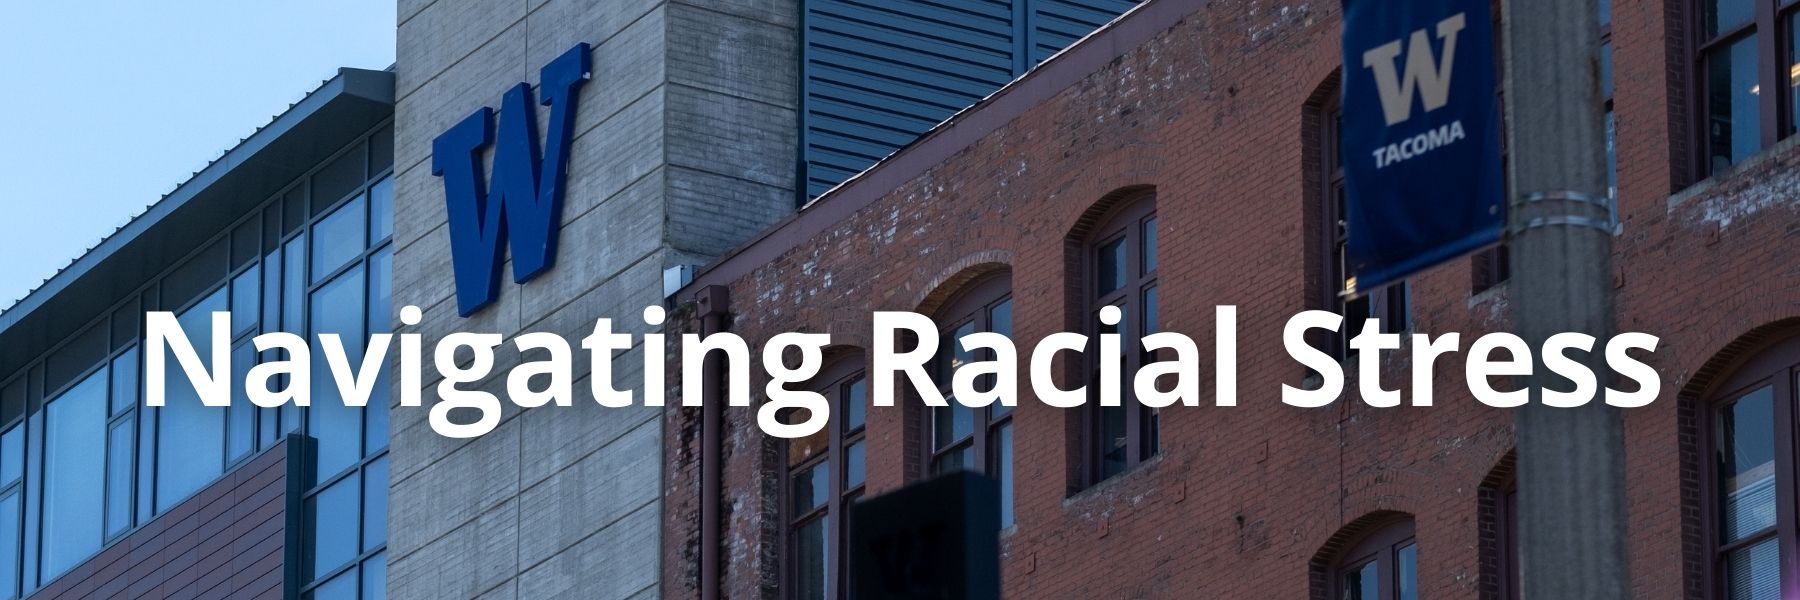 Photo of UW Tacoma building with words "Navigating Racial Stress" overlaid on top.